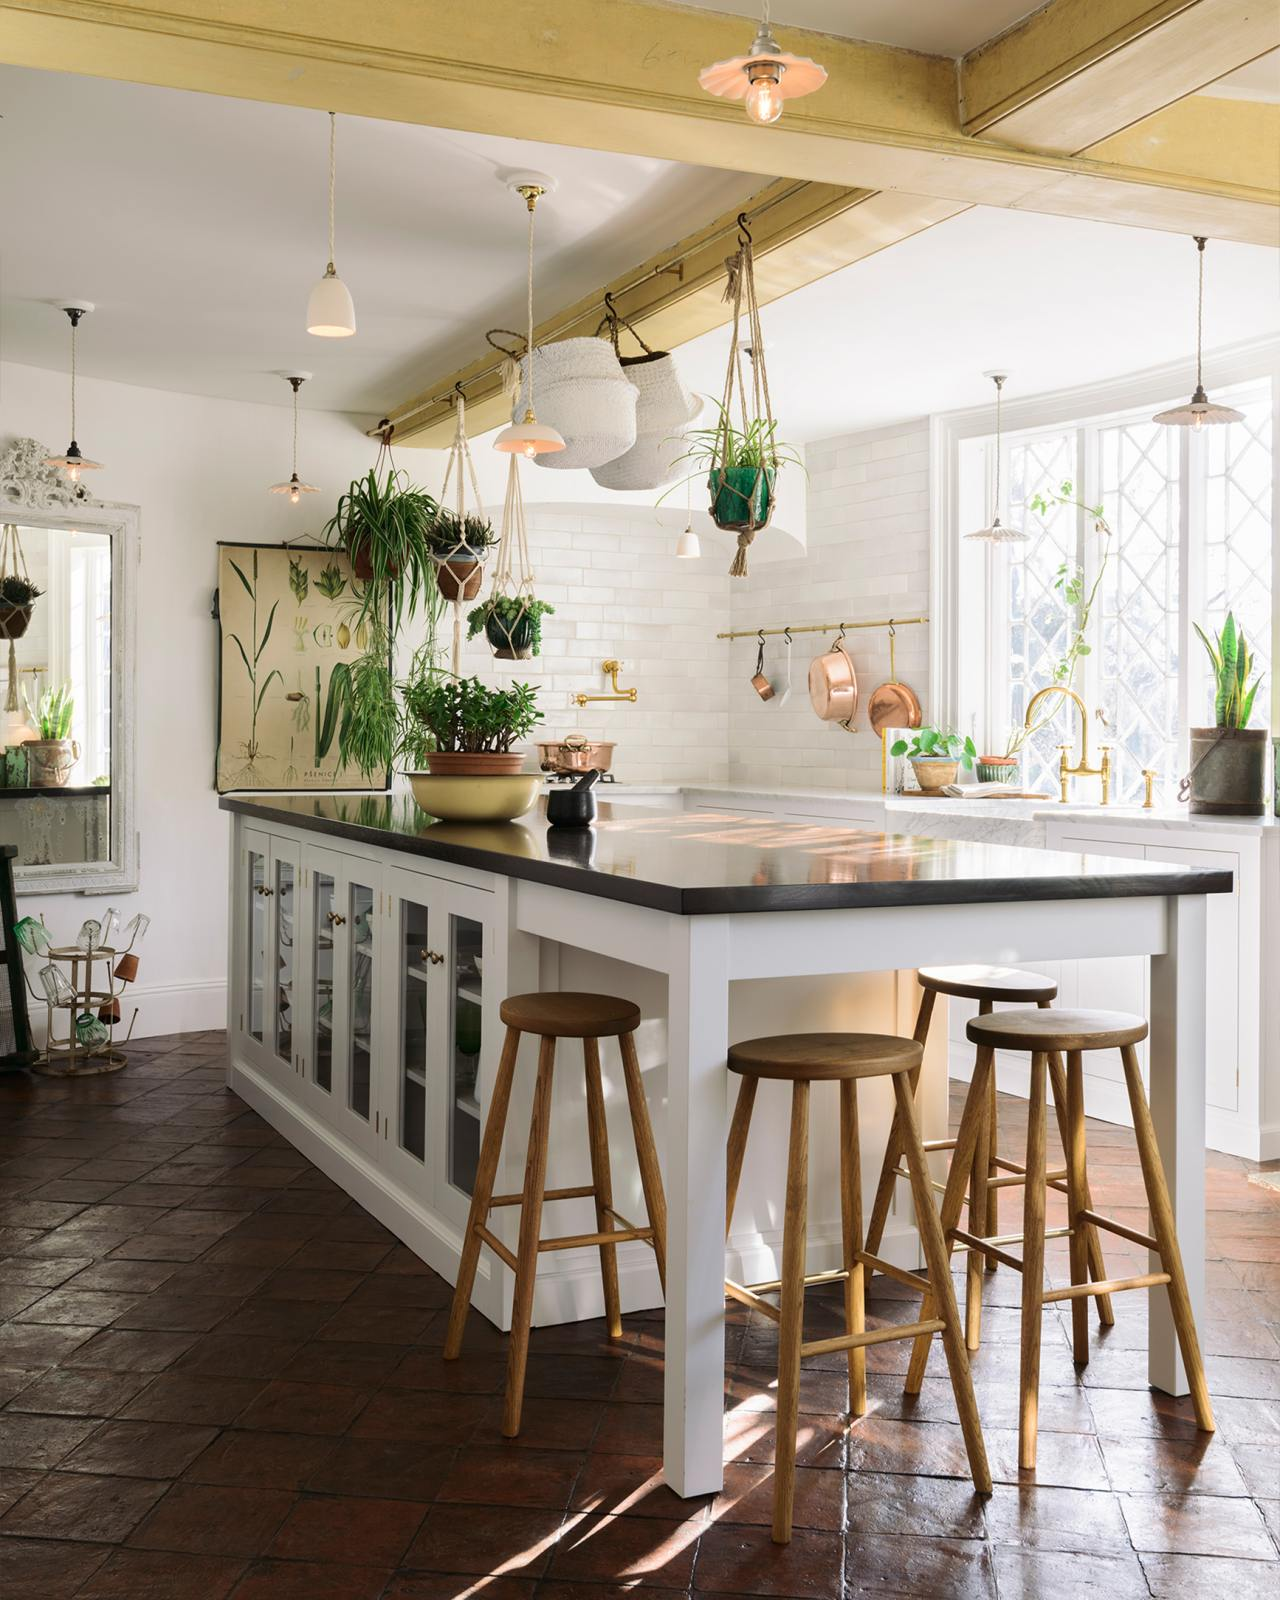 deVOL English country kitchen with white cabinets, brass hardware, hanging plants, and Helen stool. #countrykitchendesign #devolkitchens